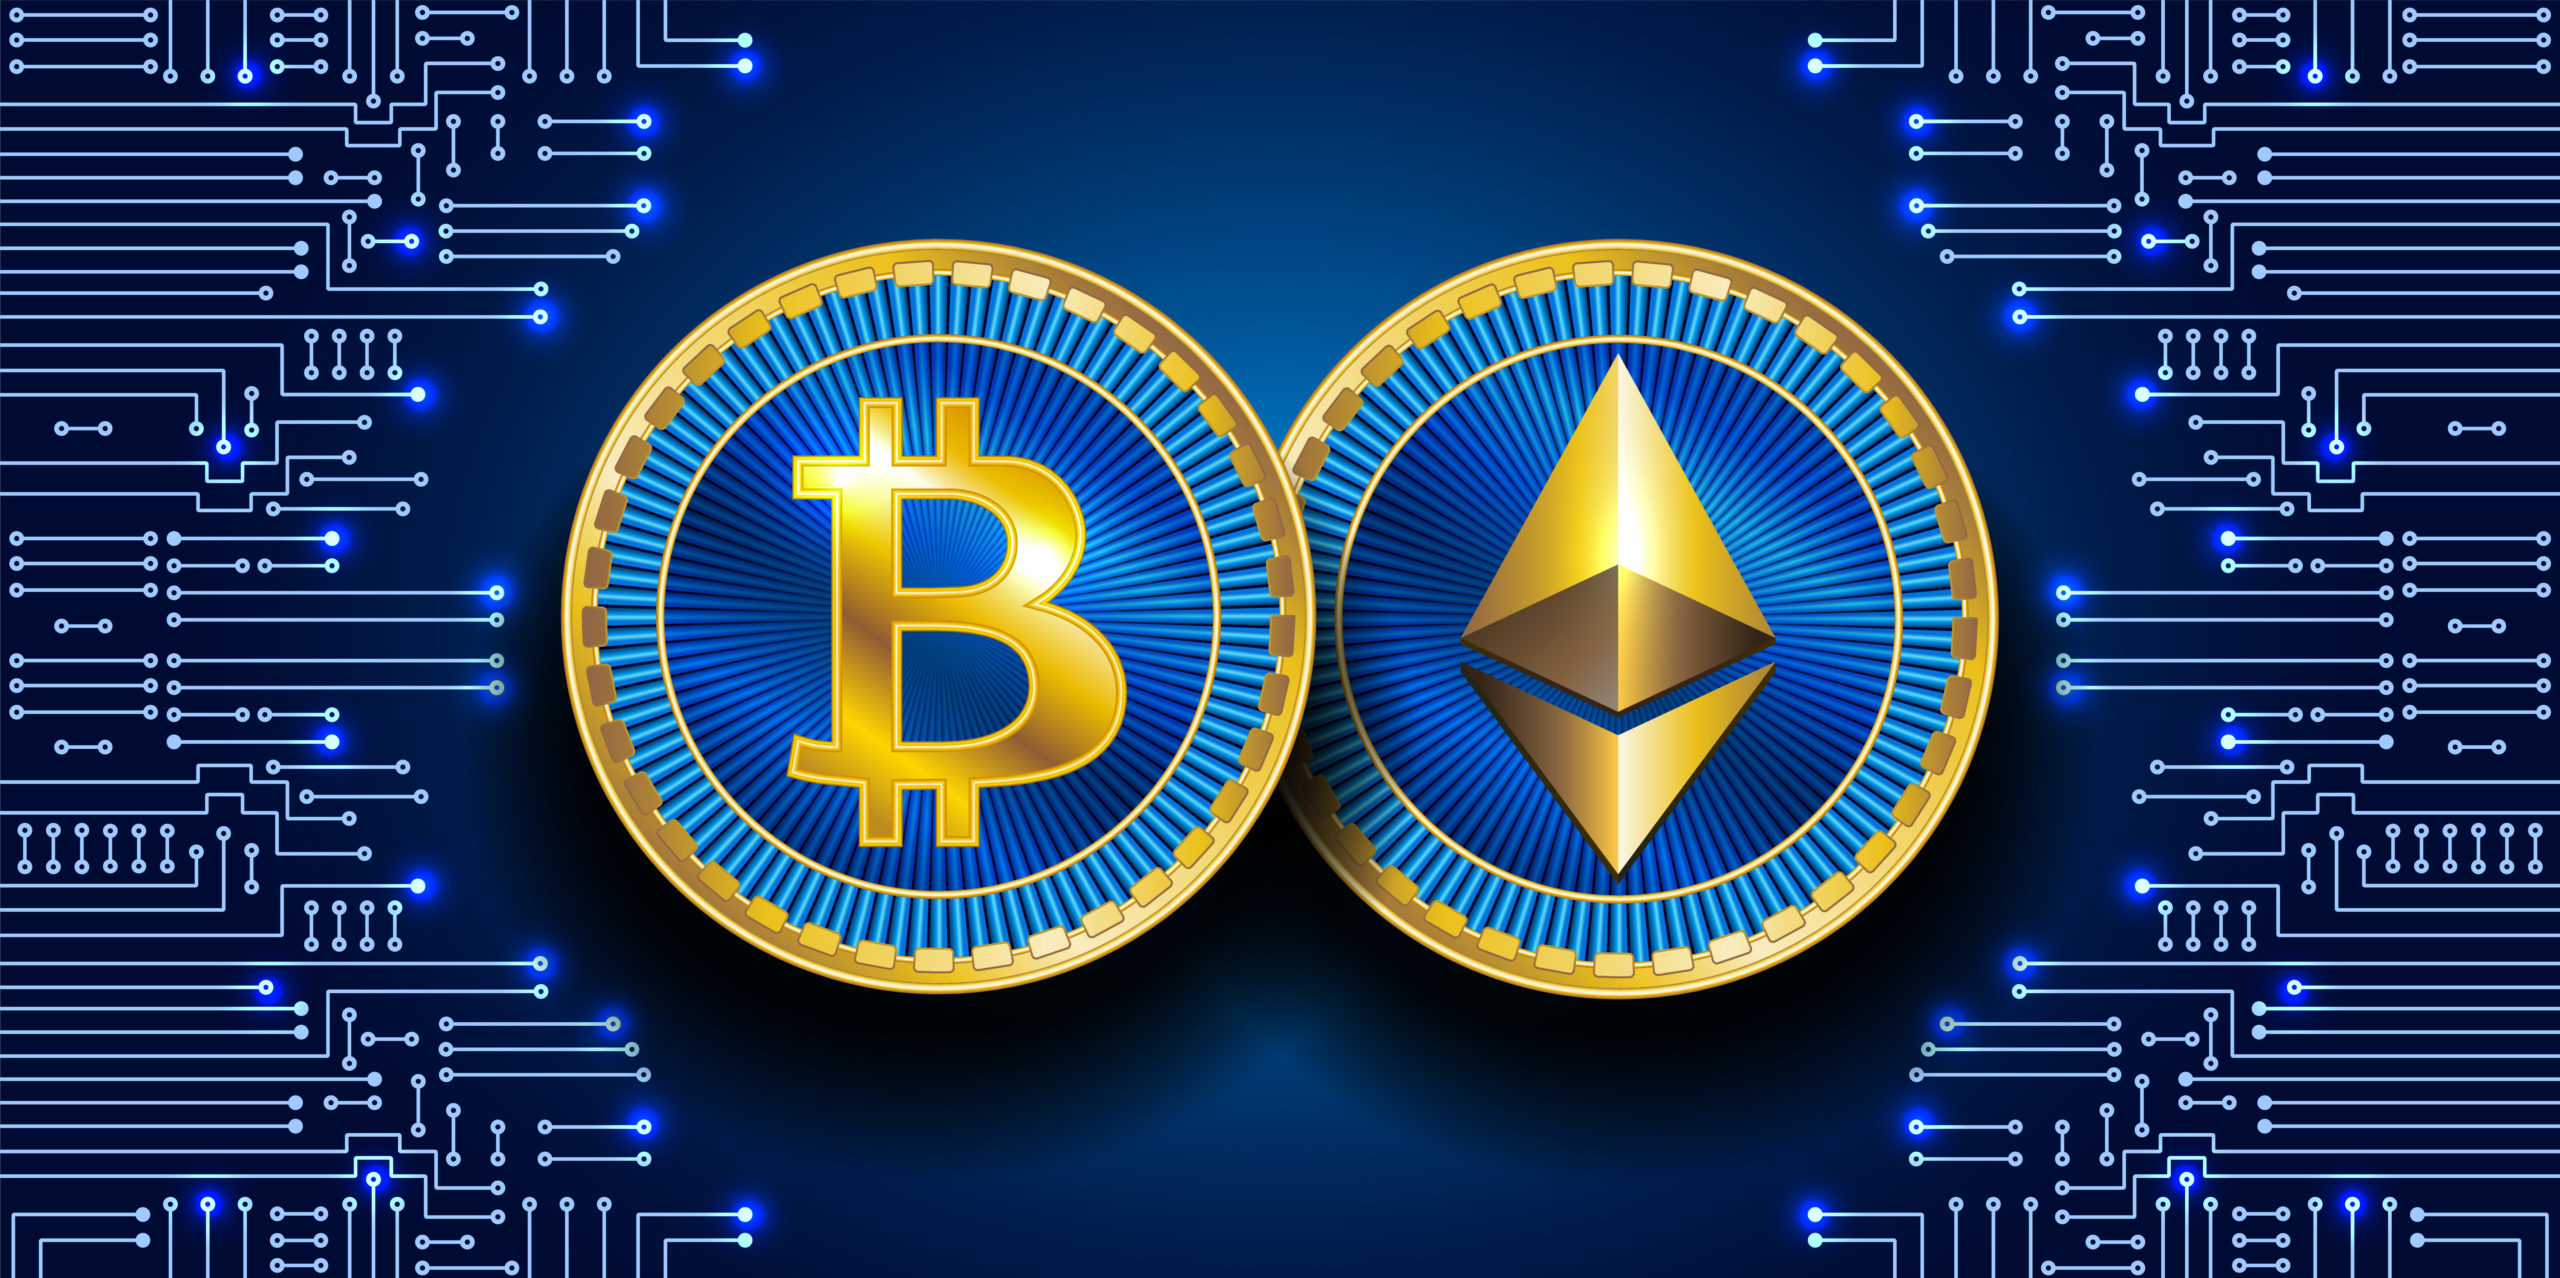 Bitcoin, Ethereum Poised for Big Price Movements